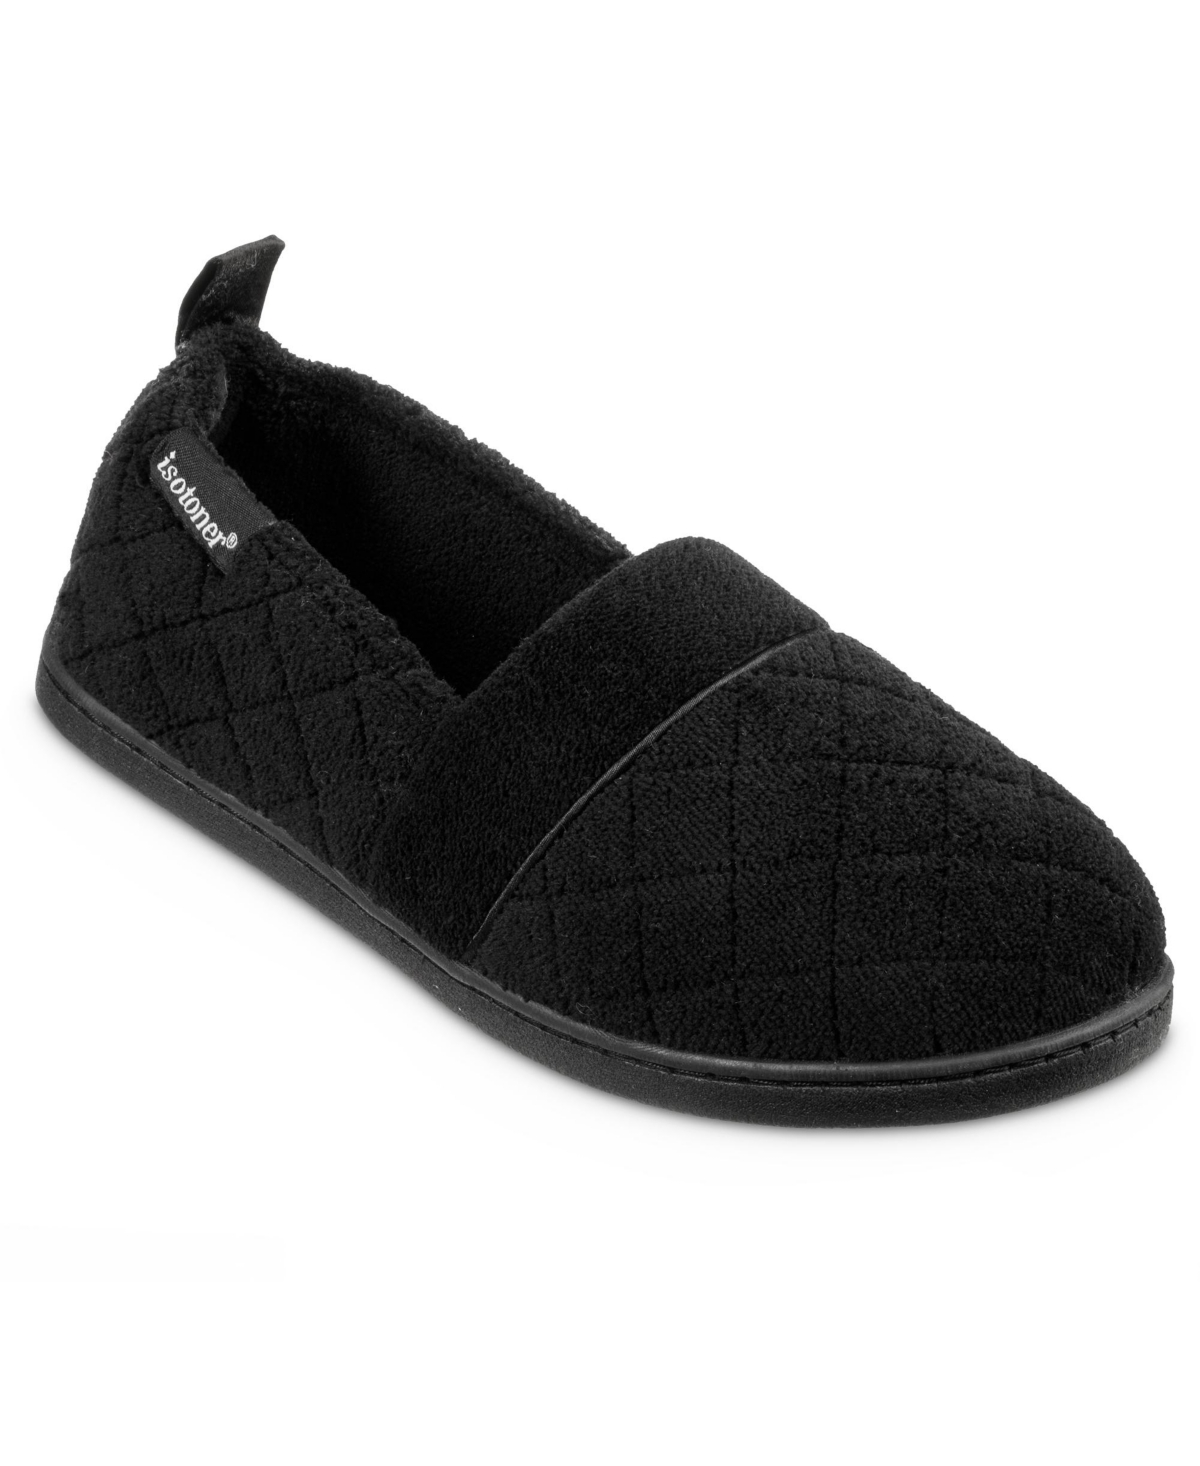 Quilted Memory Foam Microterry Slip On Slippers - Light Gray